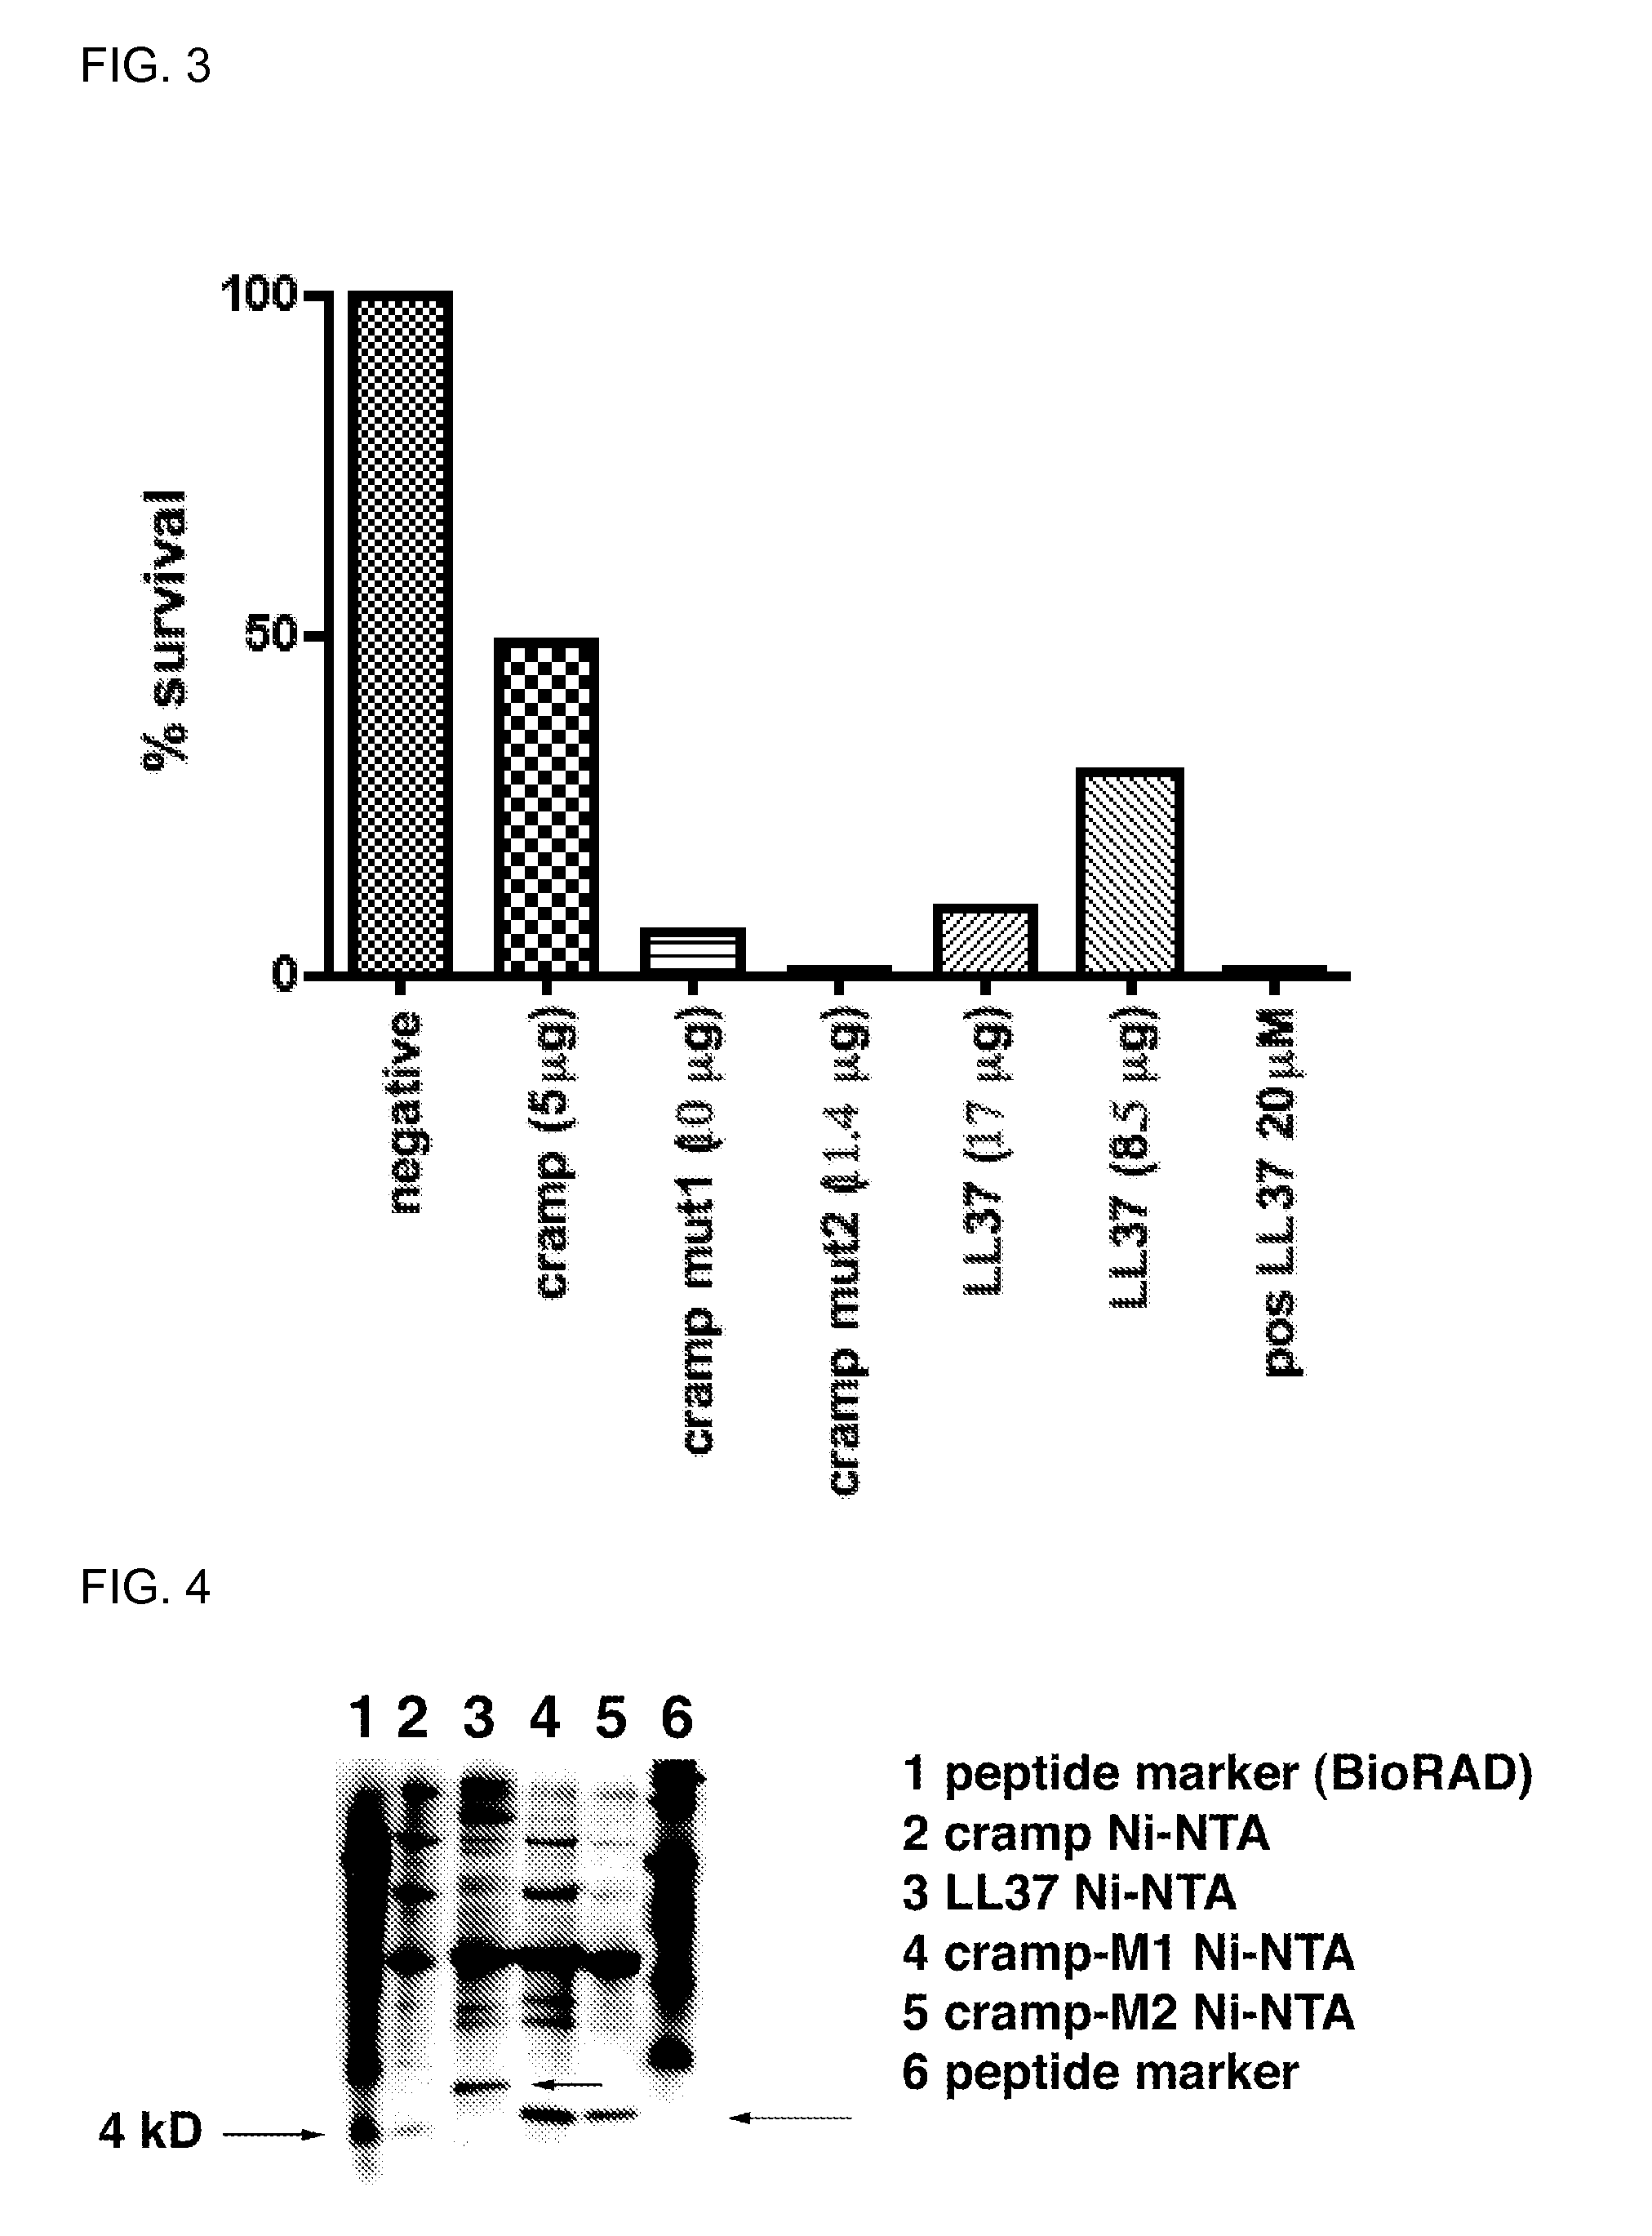 Production of Anti-microbial peptides